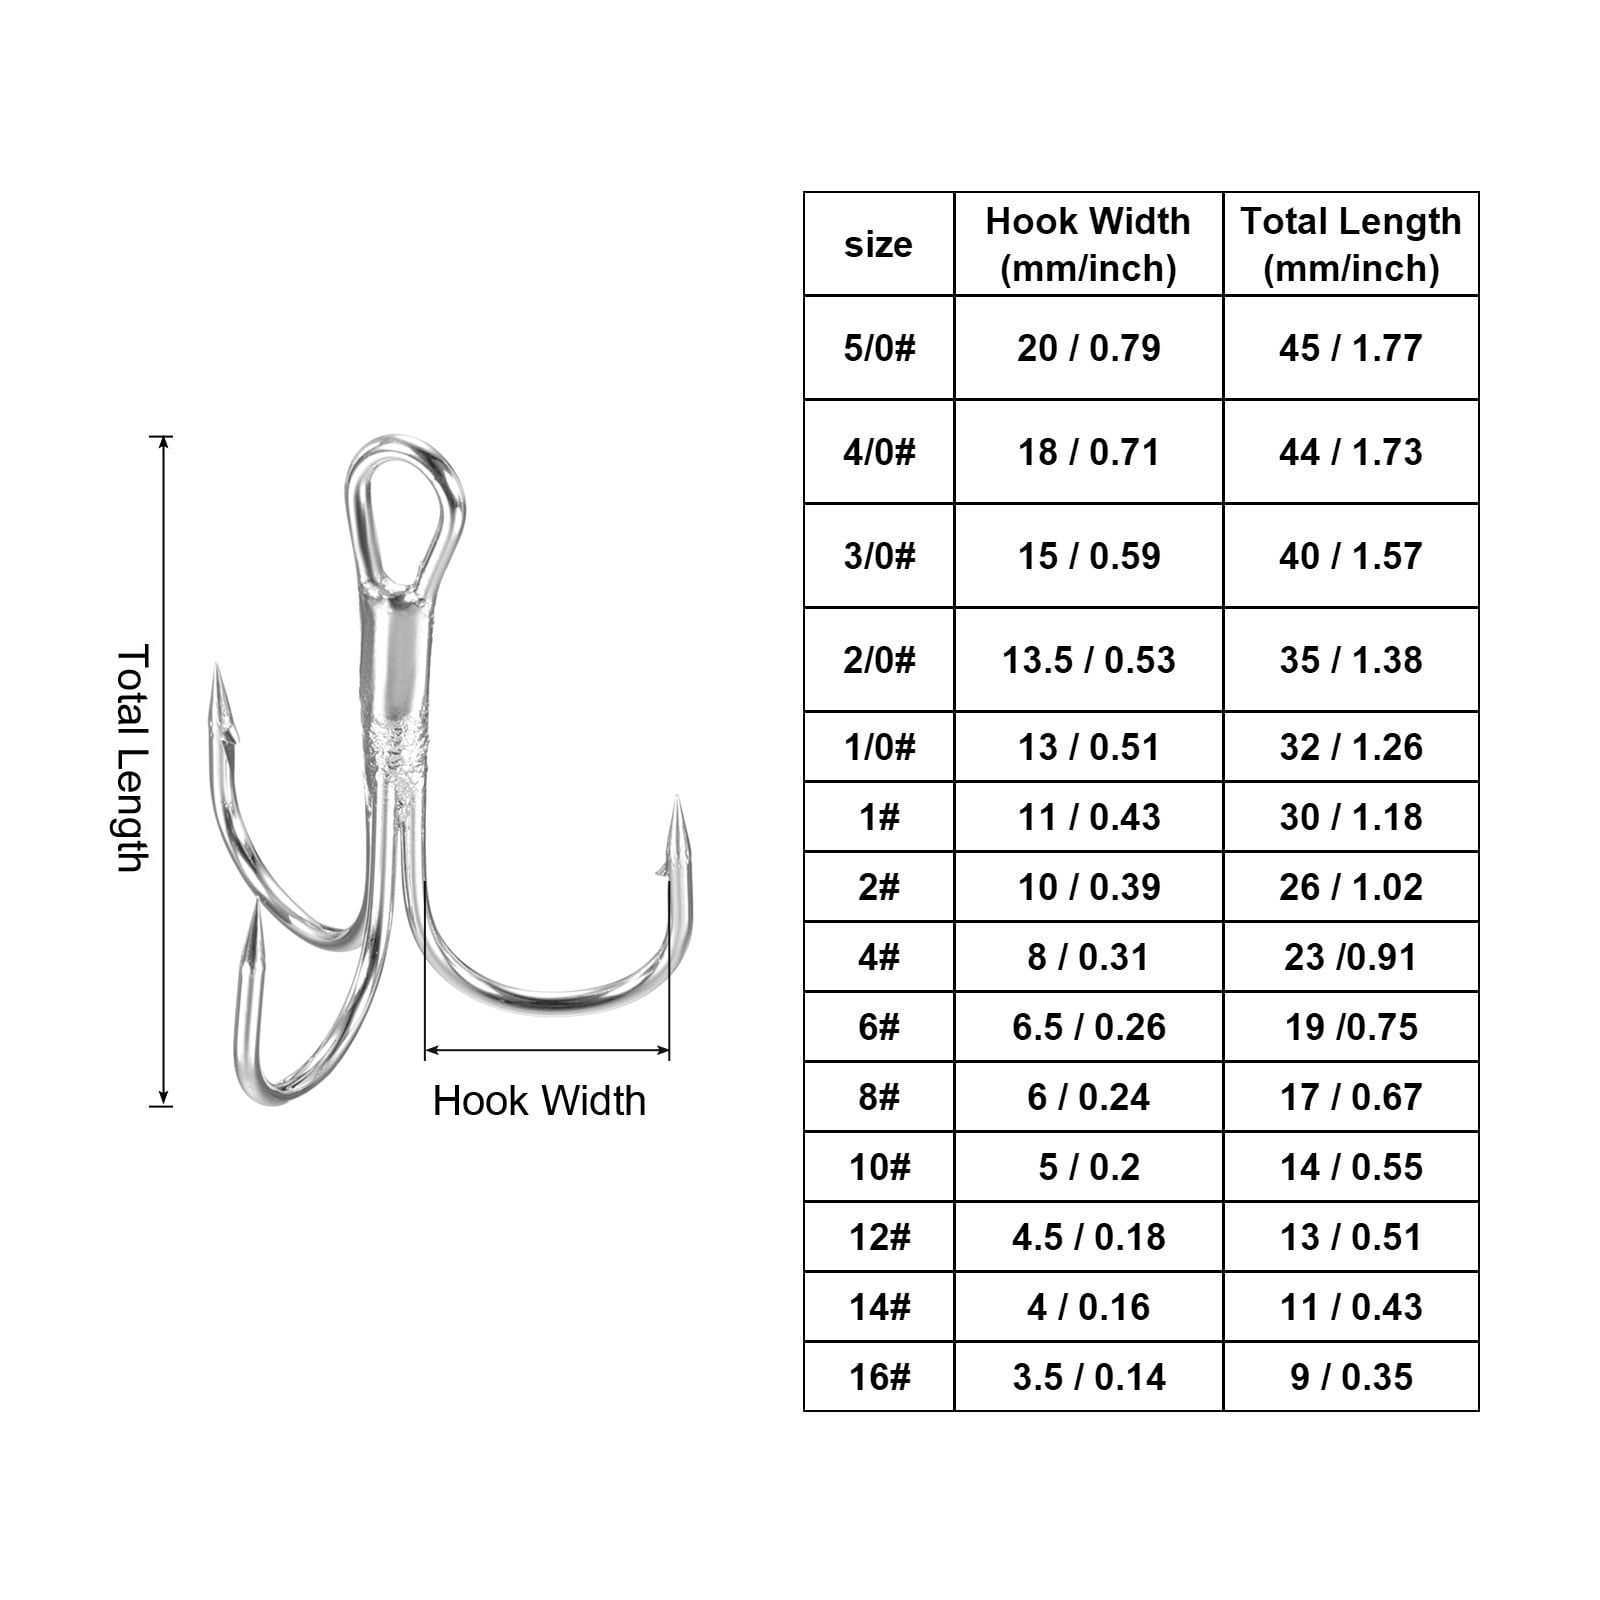 12# 0.51 Treble Fish Hooks Carbon Steel Sharp Bend Hook with Barbs, White  50 Pack 